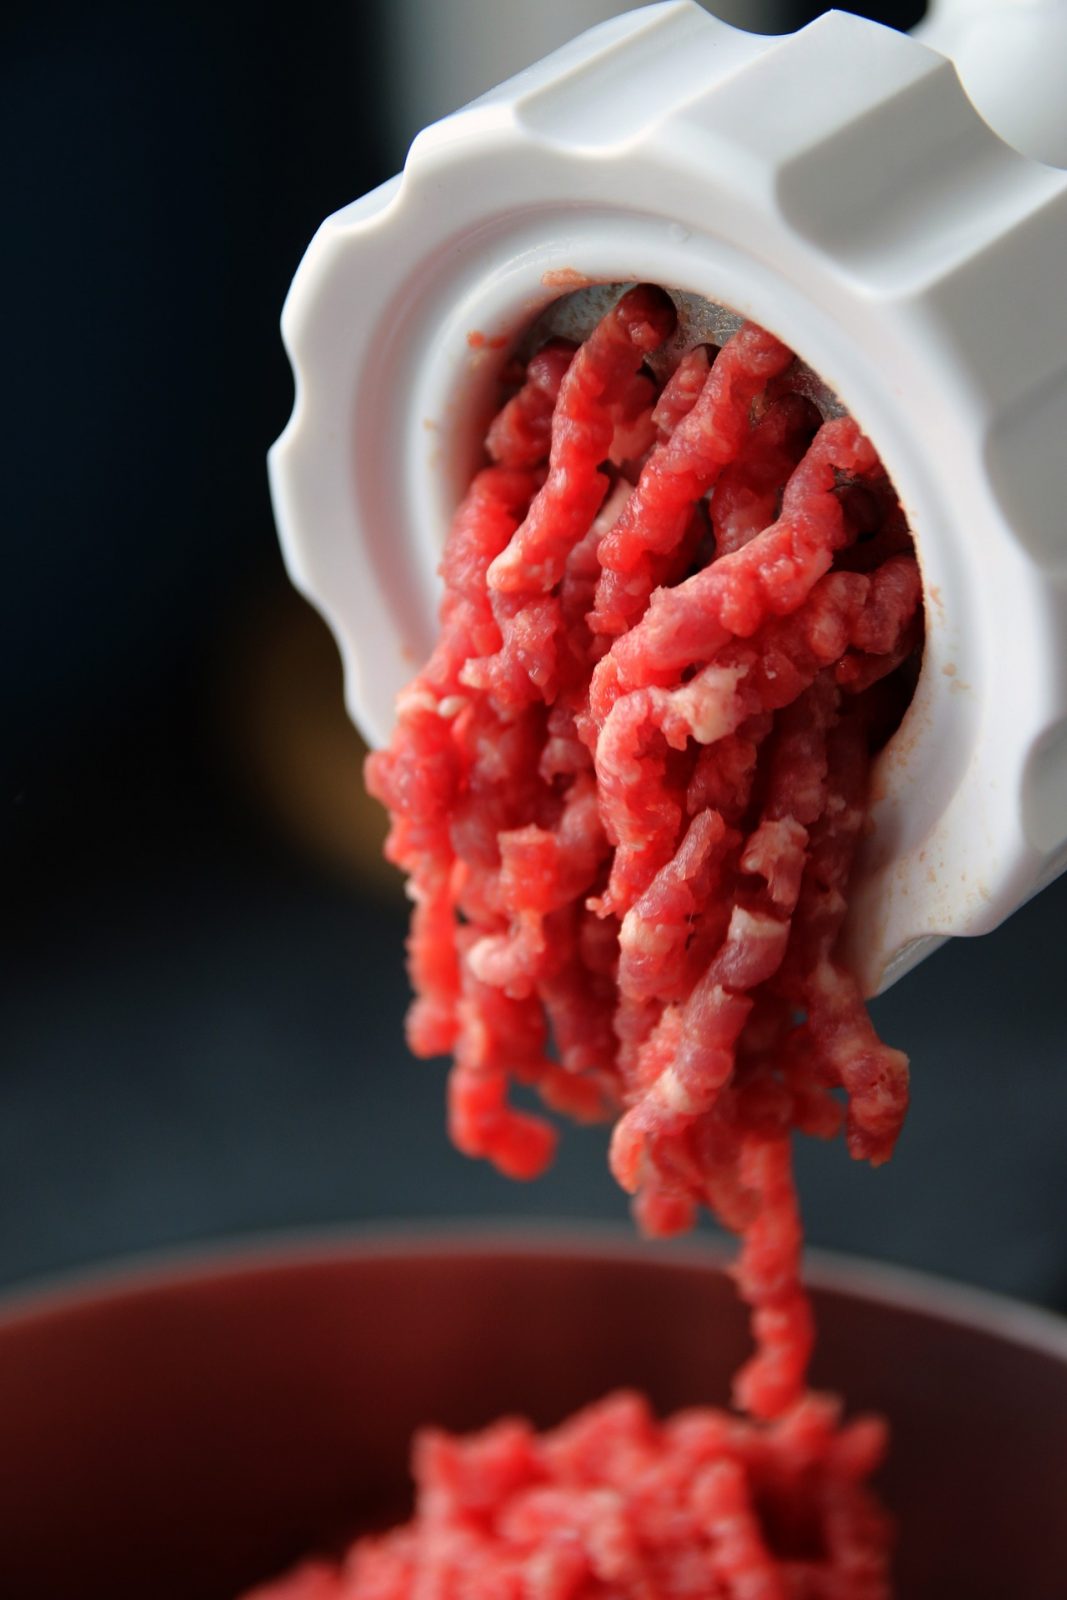 Beef and veal recalled over E. coli contamination